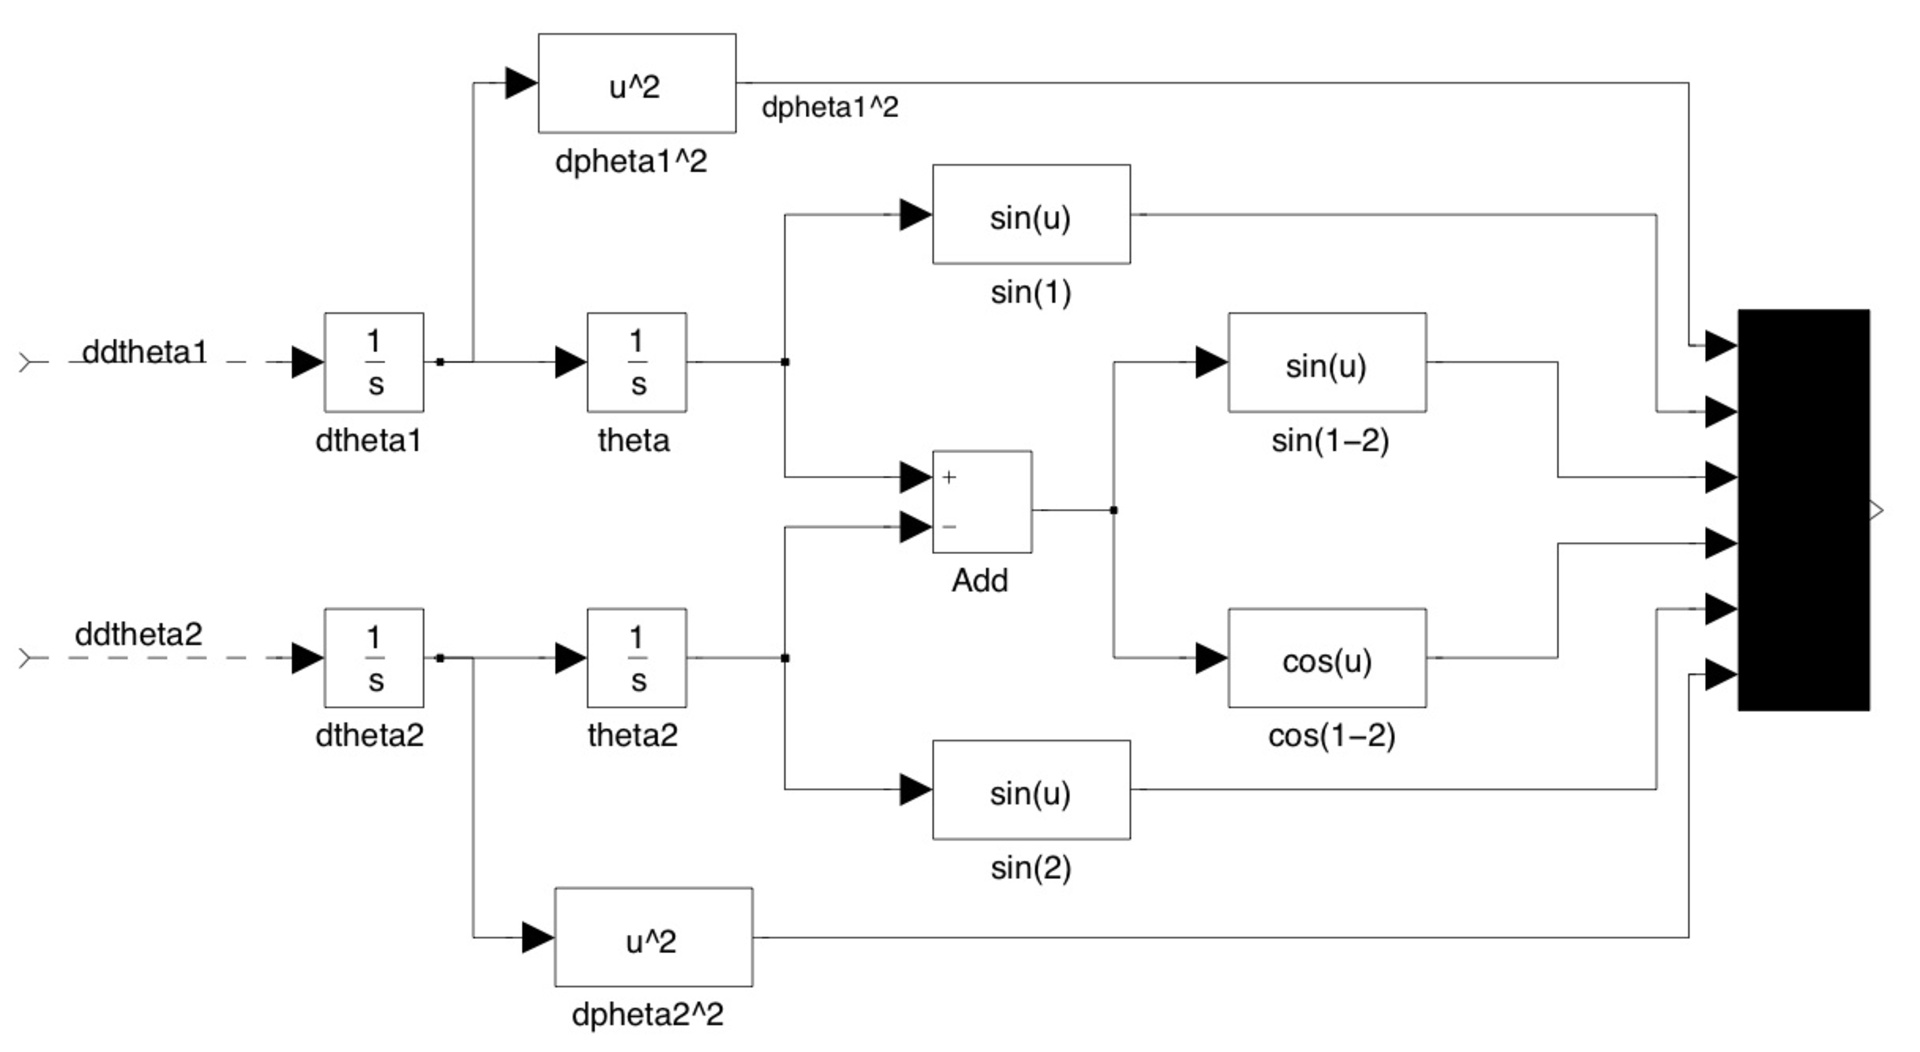 The starting point for the Simulink model.